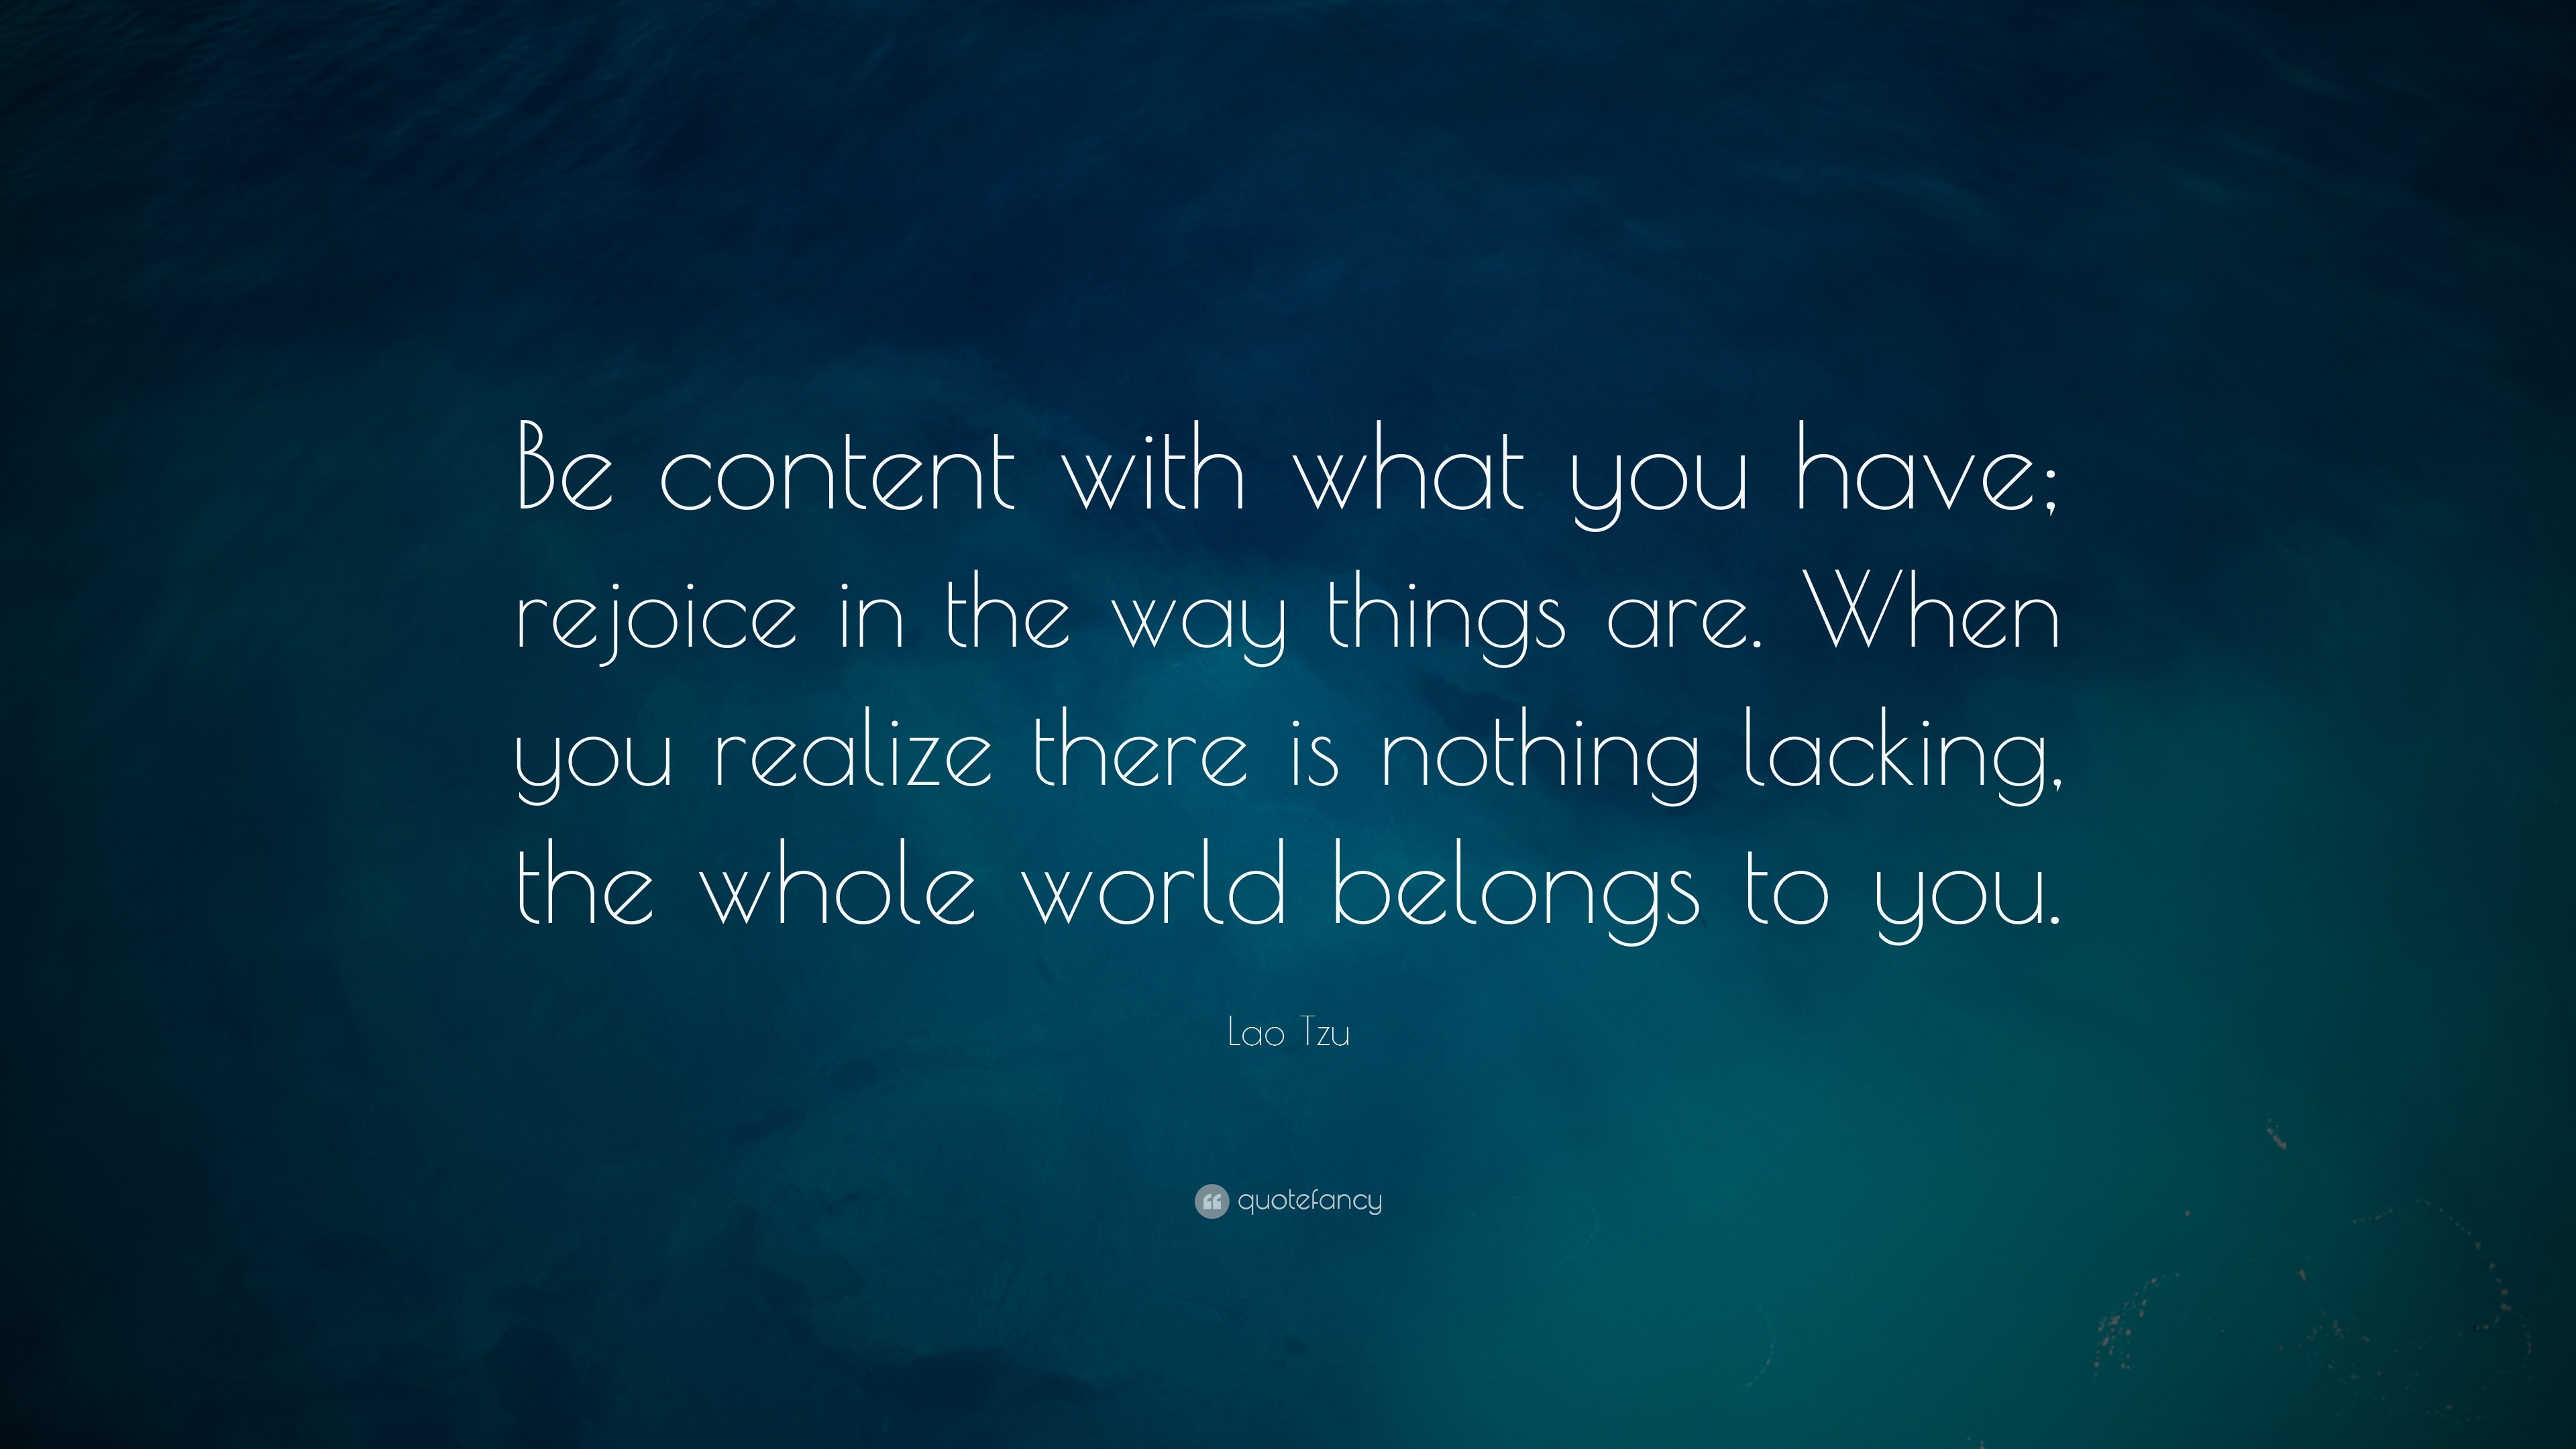 3840x2160 Lao Tzu Quote: “Be content with what you have; rejoice in the way